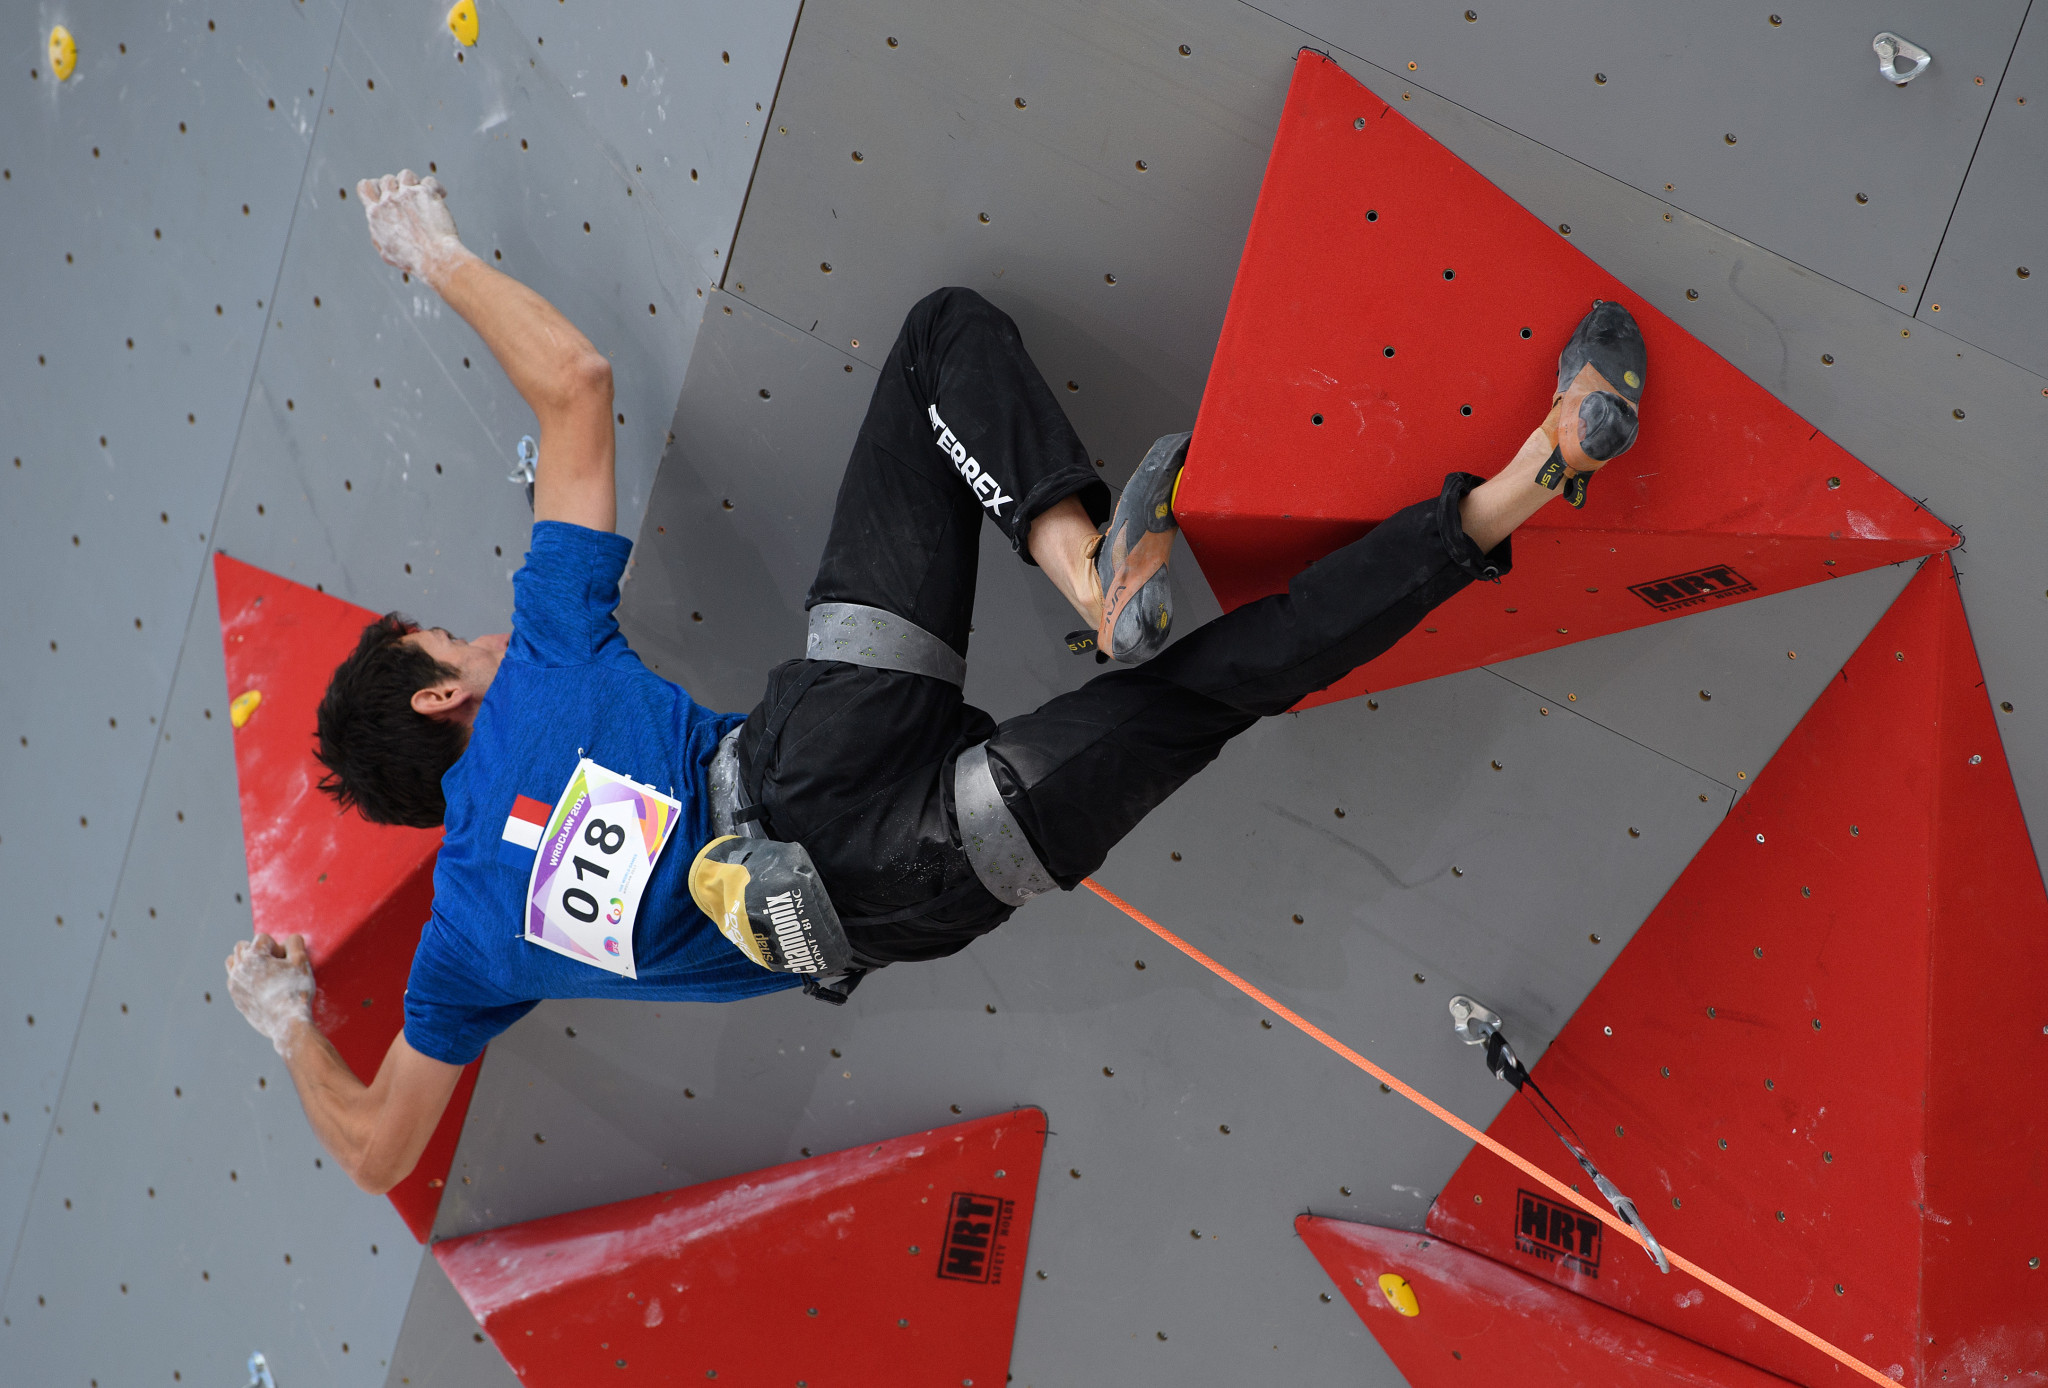 France's Romain Desgranges strengthened his overall IFSC Lead World Cup lead with victory in Edinburgh today ©Getty Images